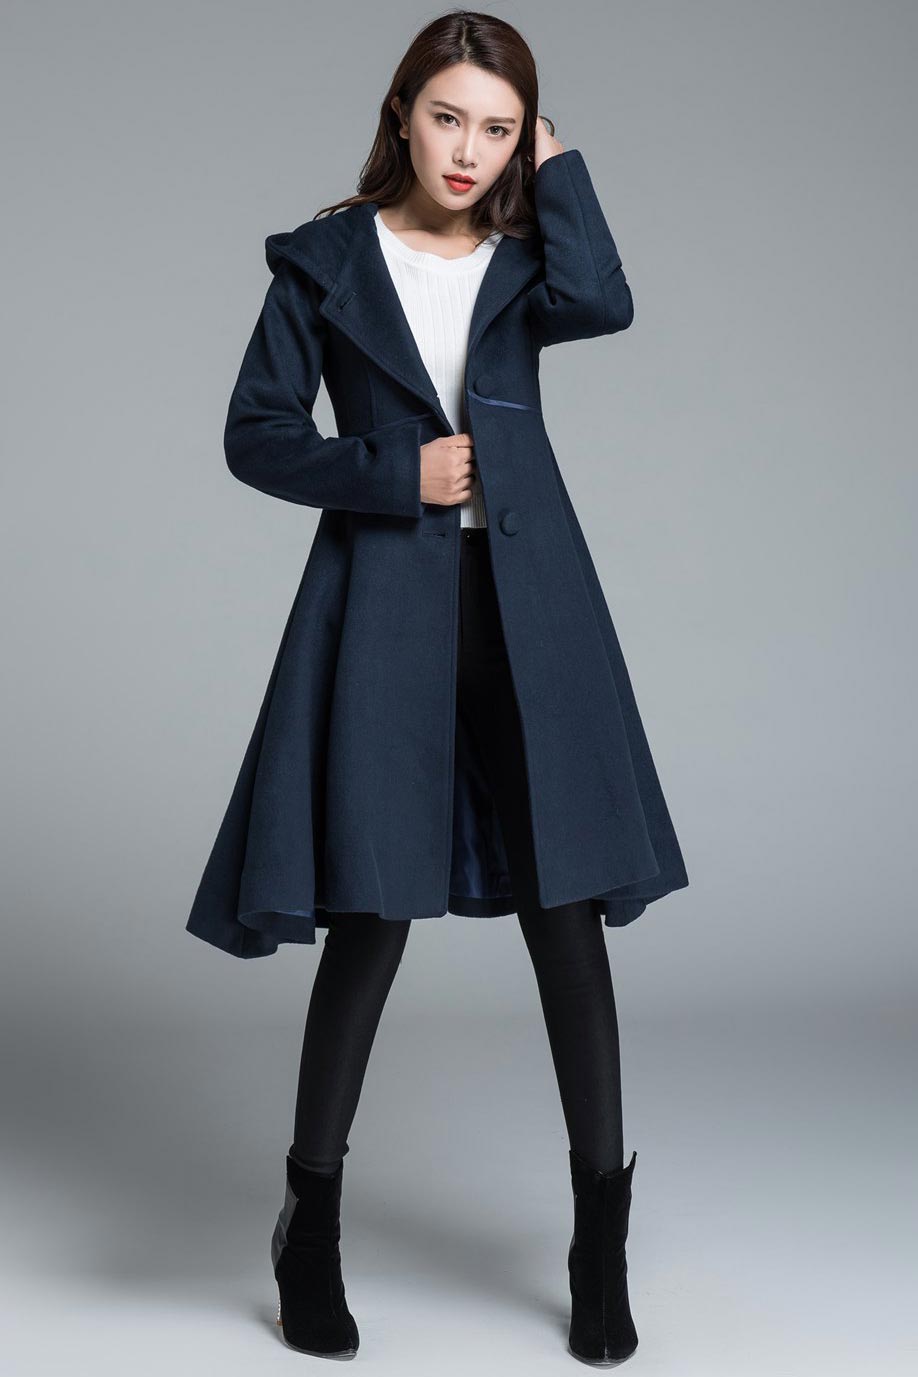 fit and flare dress coat for winter, blue wool coat 1648#